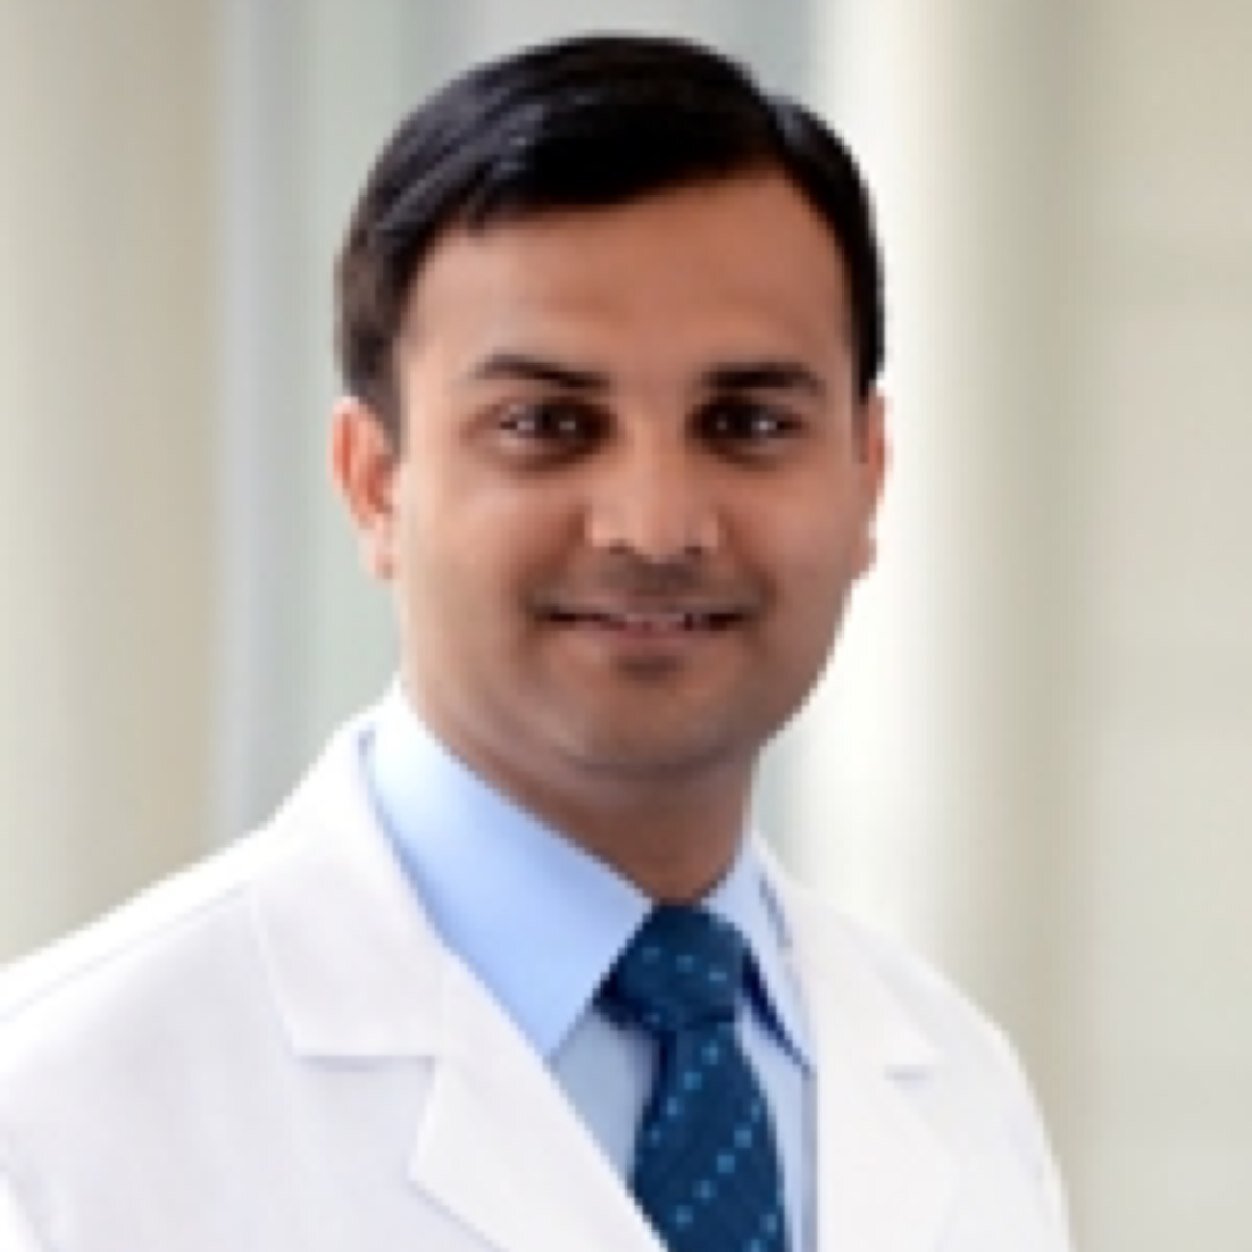 Associate Professor & Associate Director of Cardiovascular Fellowship Baylor College of Medicine, Houston, TX. All tweets are my personal opinion! 🇺🇸🇵🇰